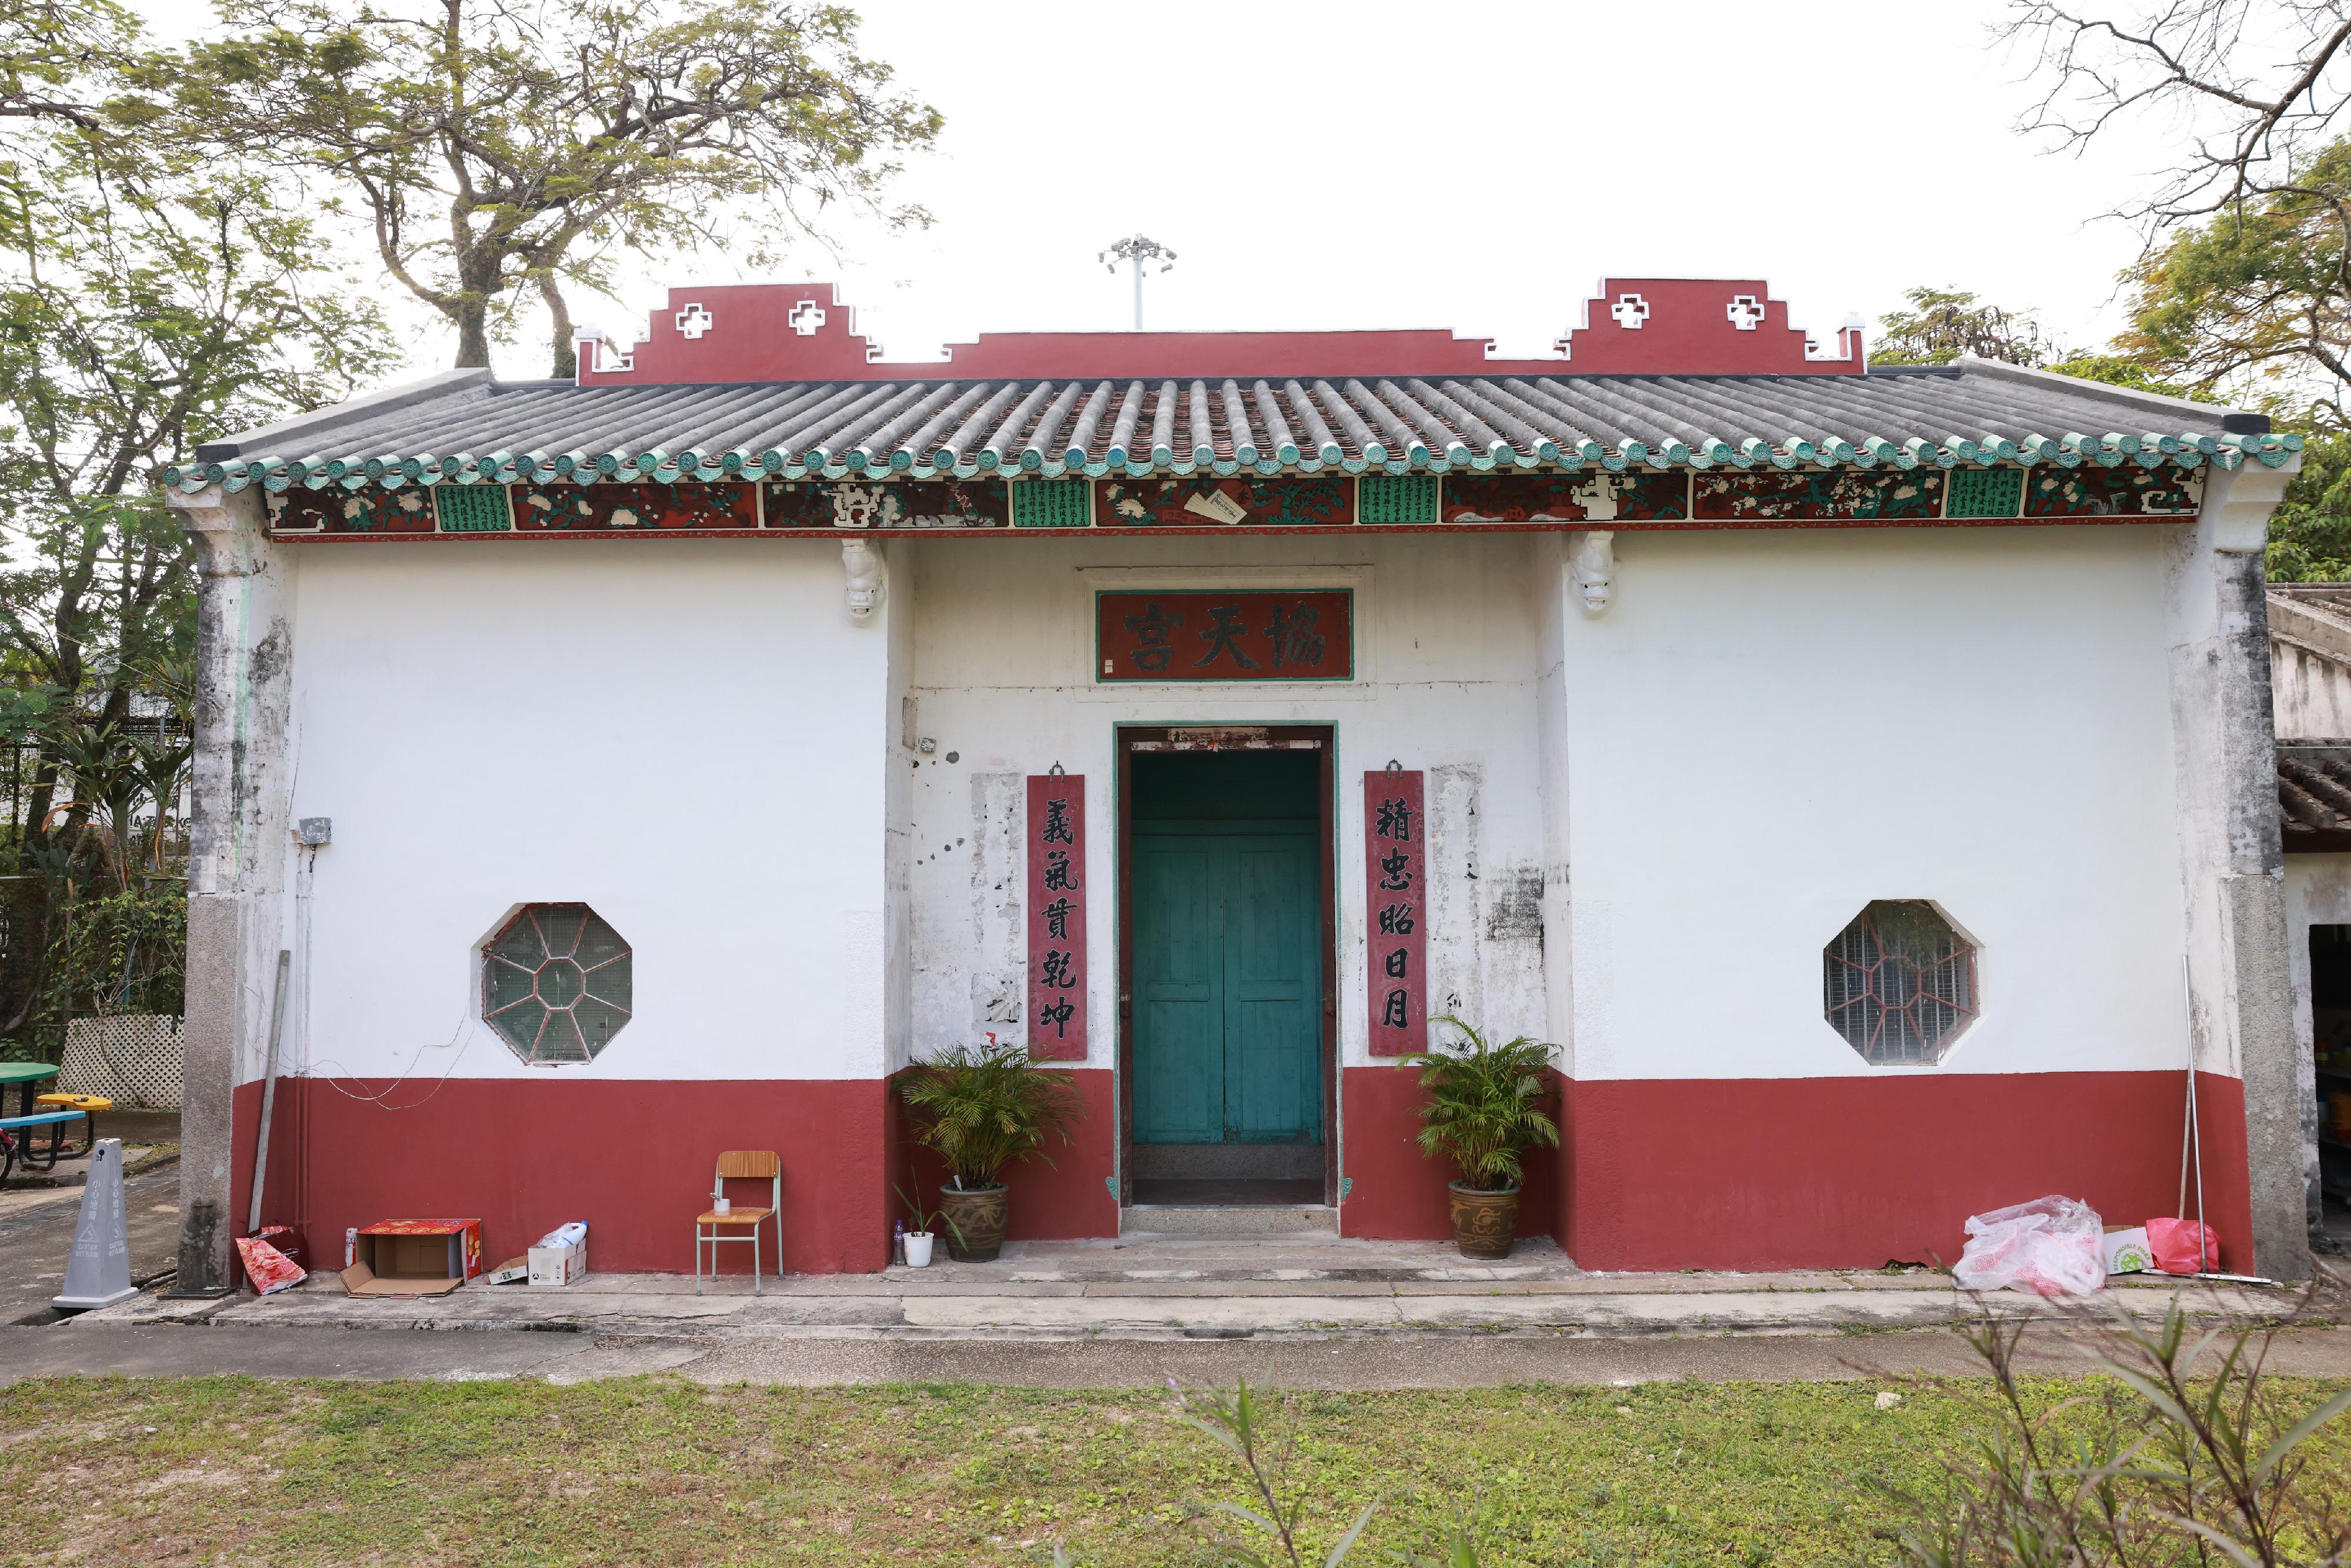 The Second Phase Opening-up of Sha Tau Kok will begin on January 1 next year. Initially, up to 1,000 tourists per day will be allowed to visit all parts of Sha Tau Kok, except Chung Ying Street, after applying online for a Closed Area Permit. Photo shows the statutory monument Hip Tin Temple.
